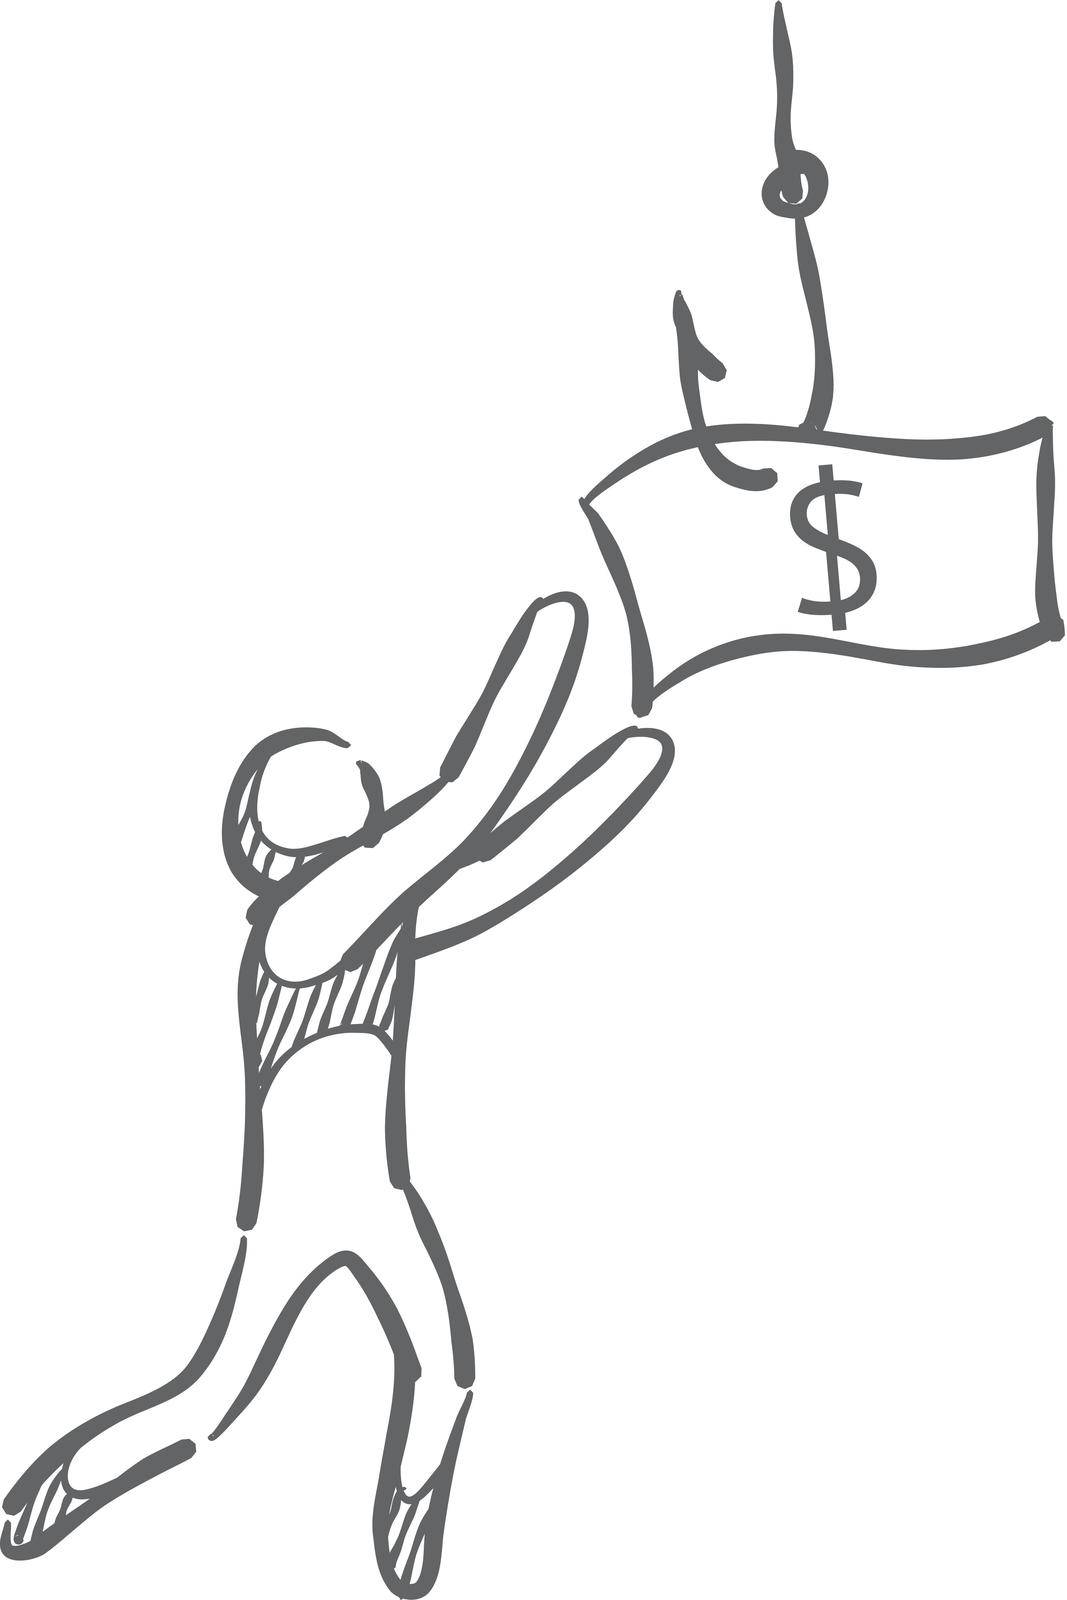 Man chasing dollar bait icon in sketch style. Vector illustration.